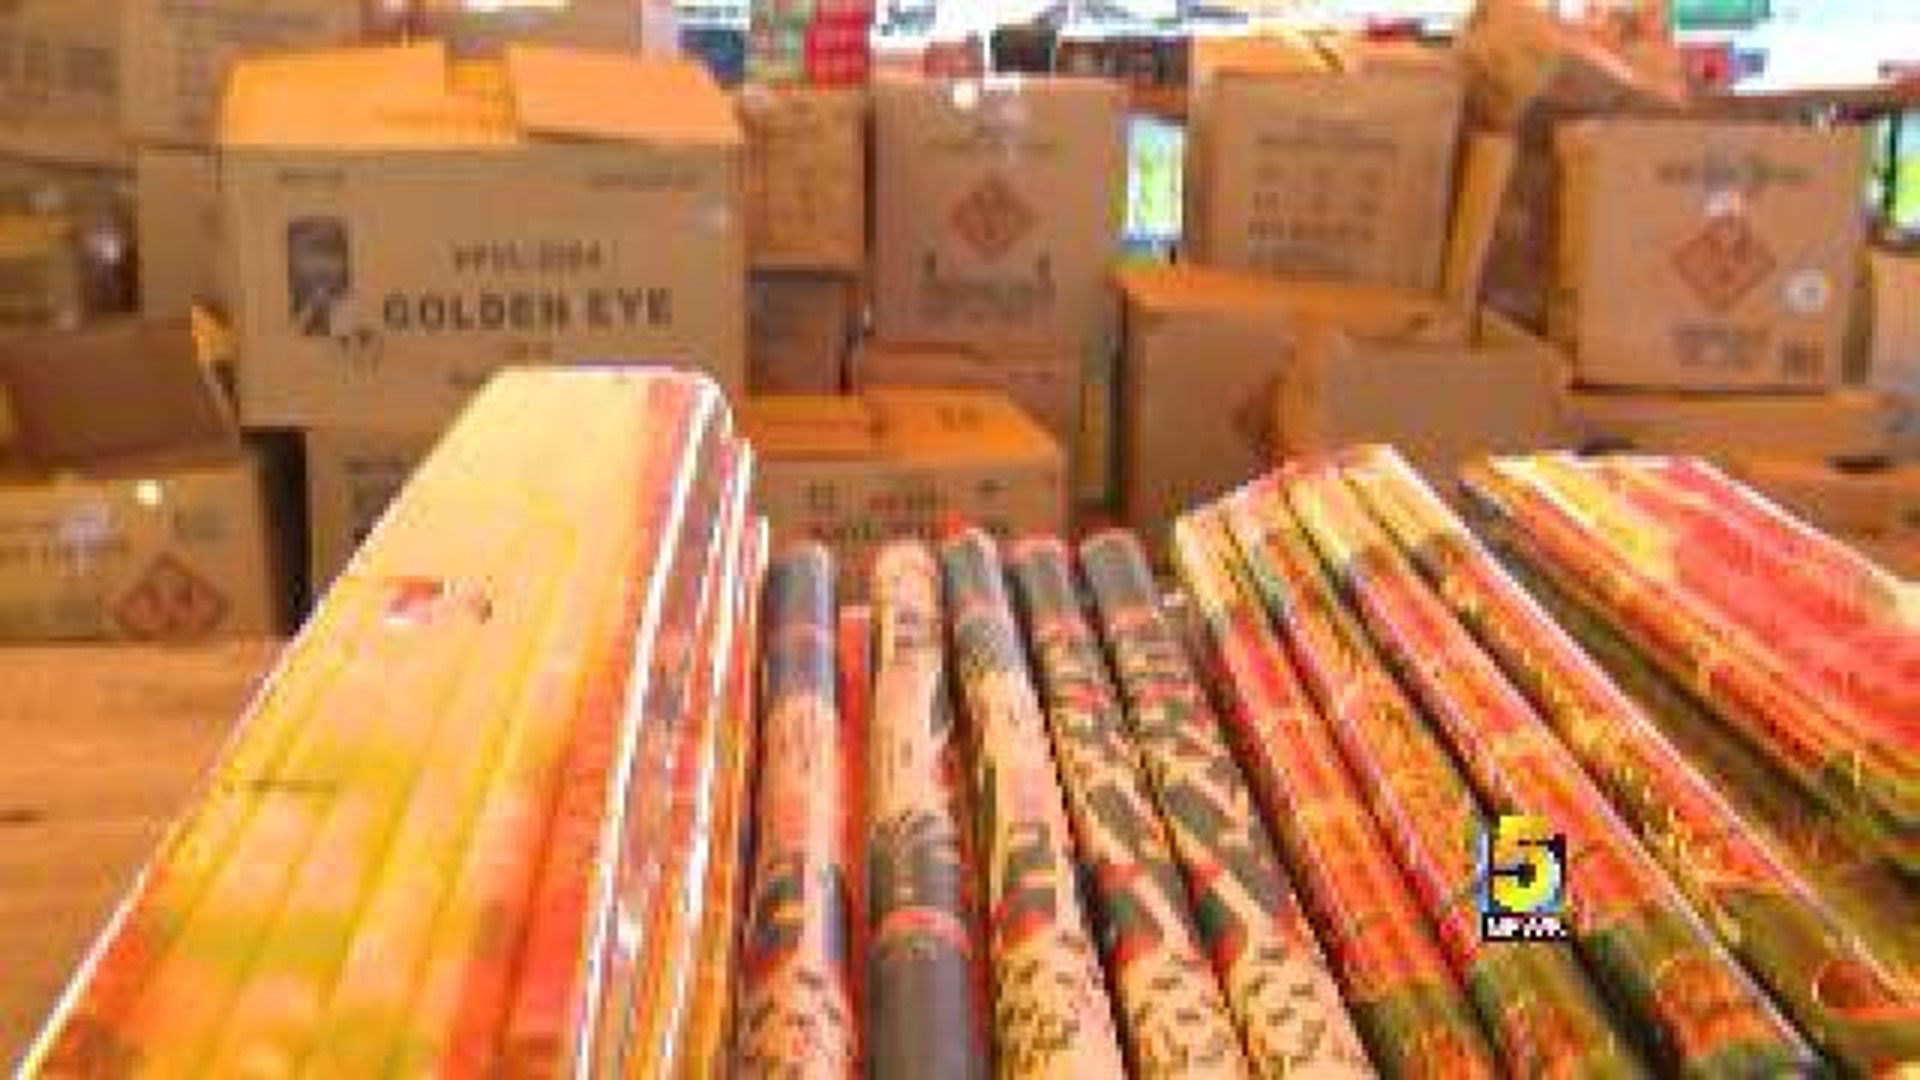 Fireworks Vendors Pack Up After The Fourth